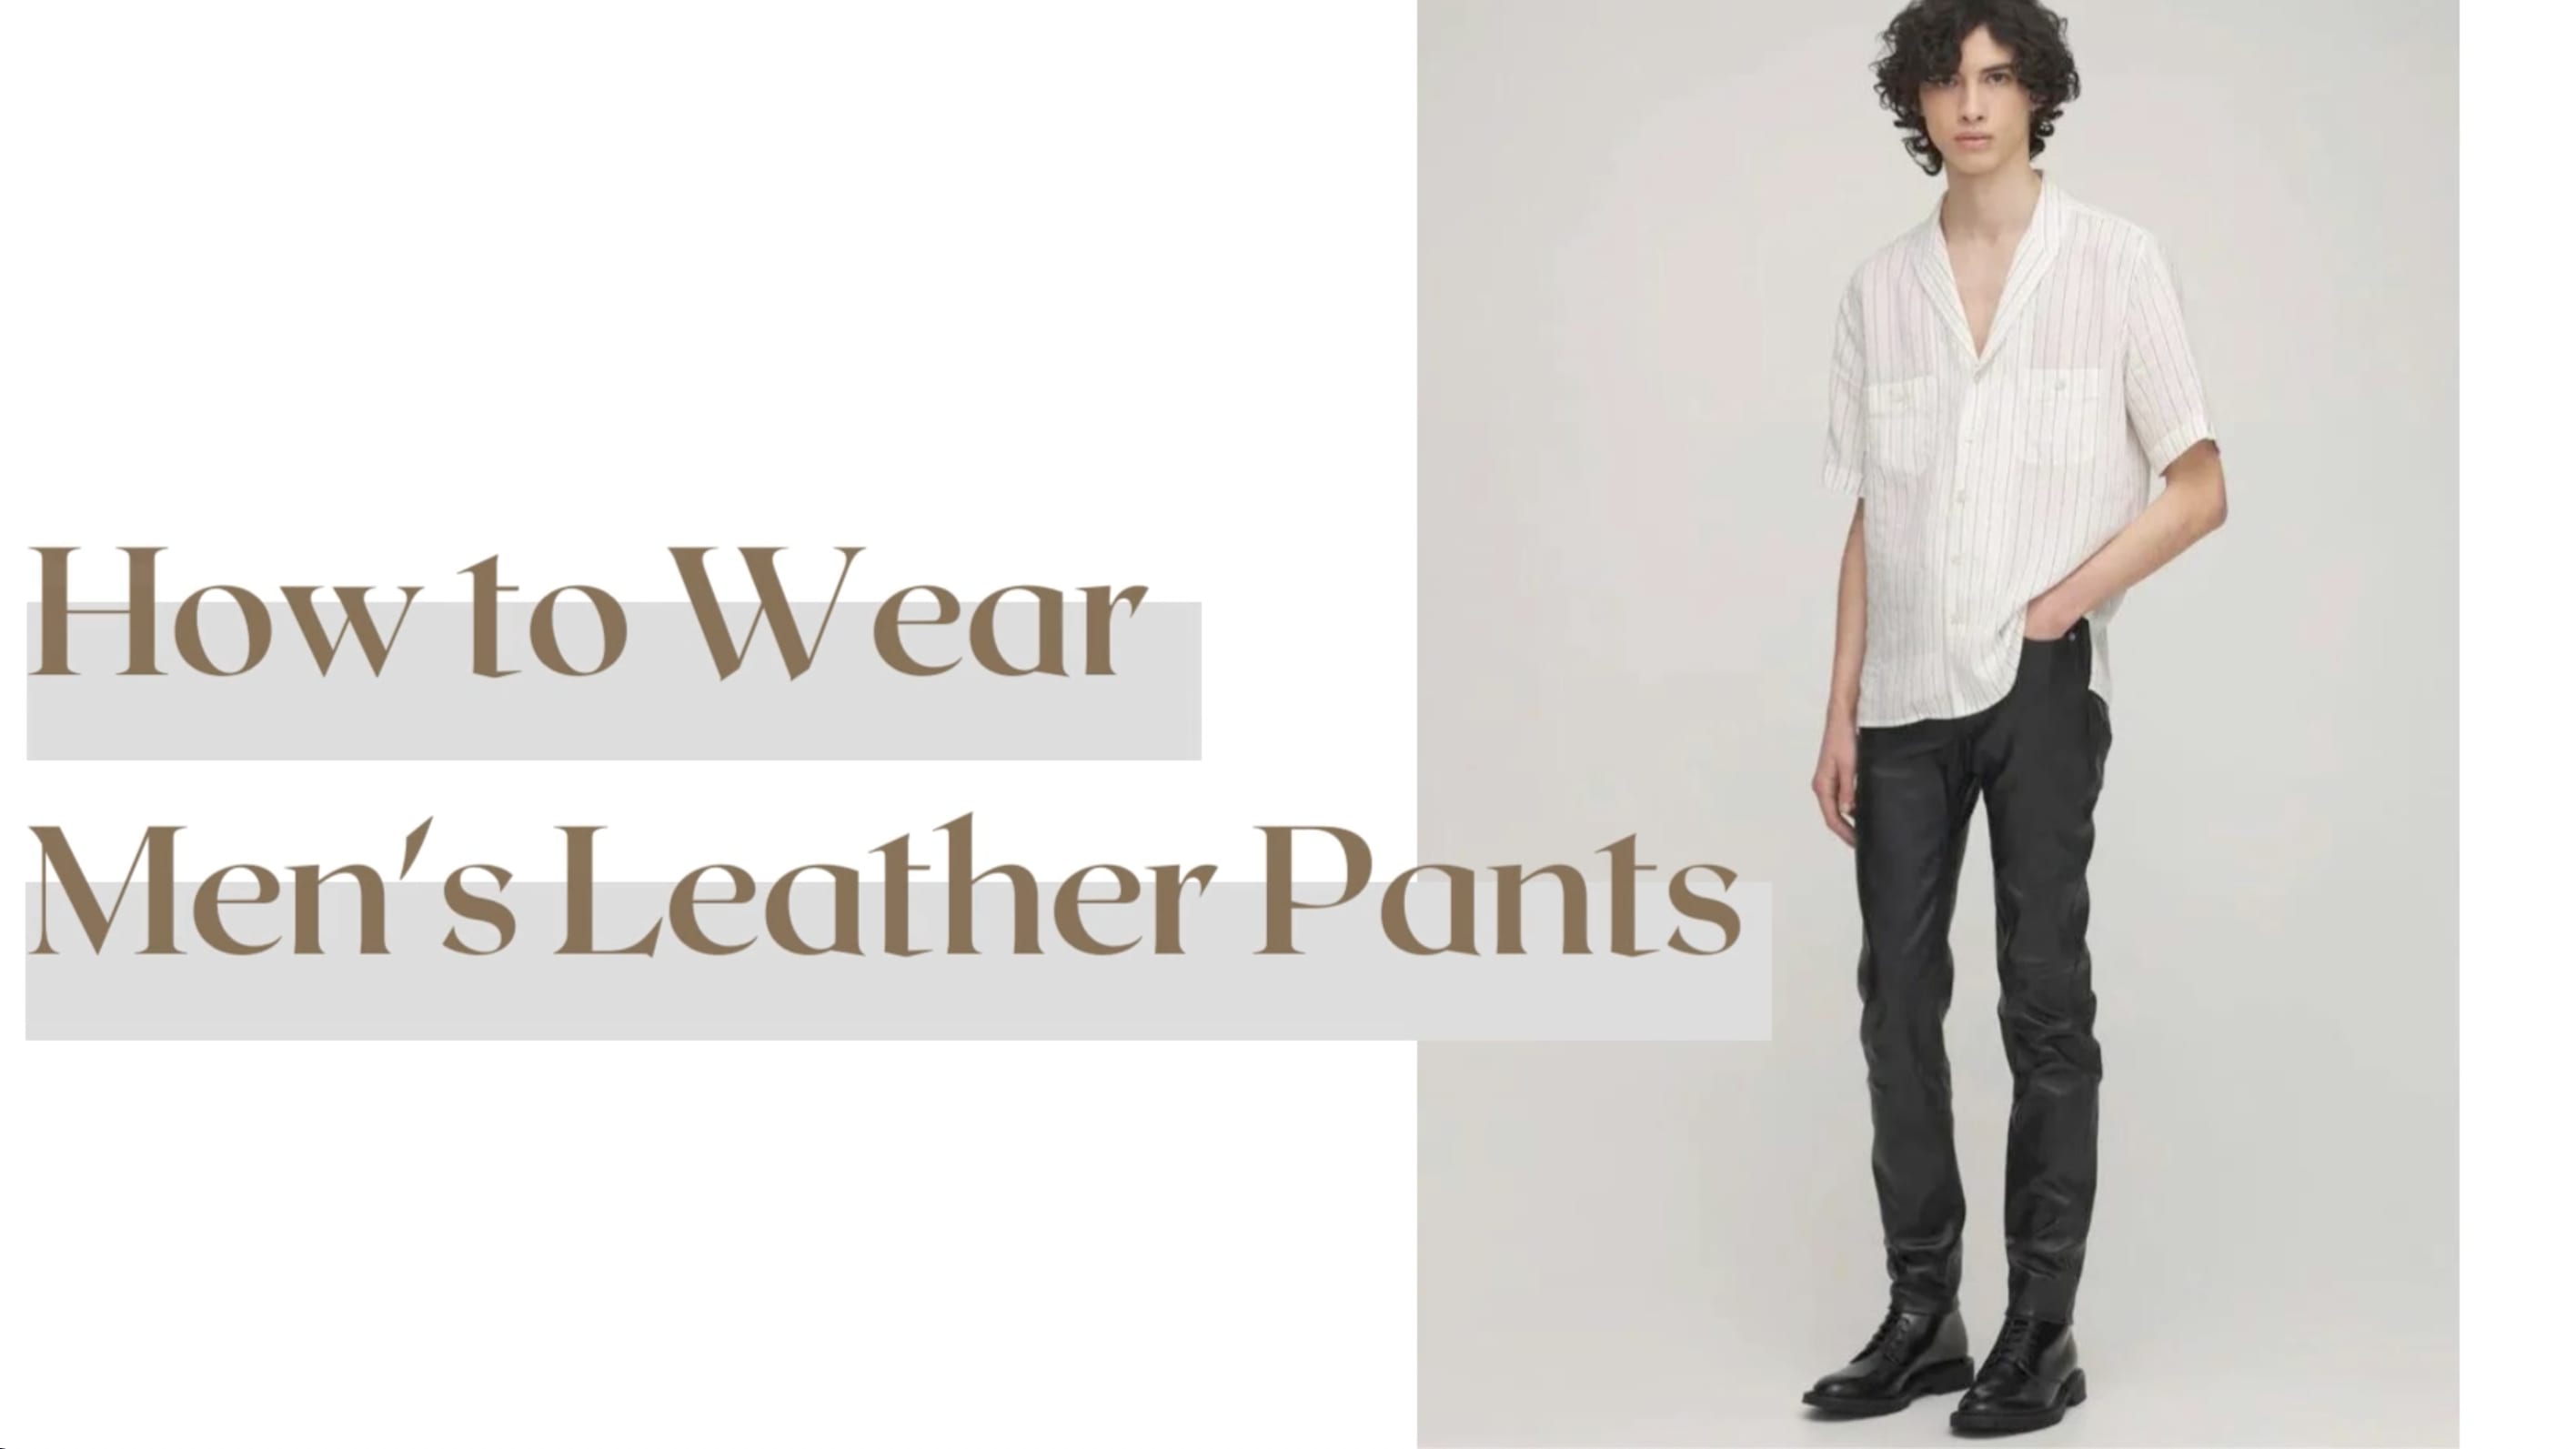 6 Tops to Wear with Leather Pants or Leggings